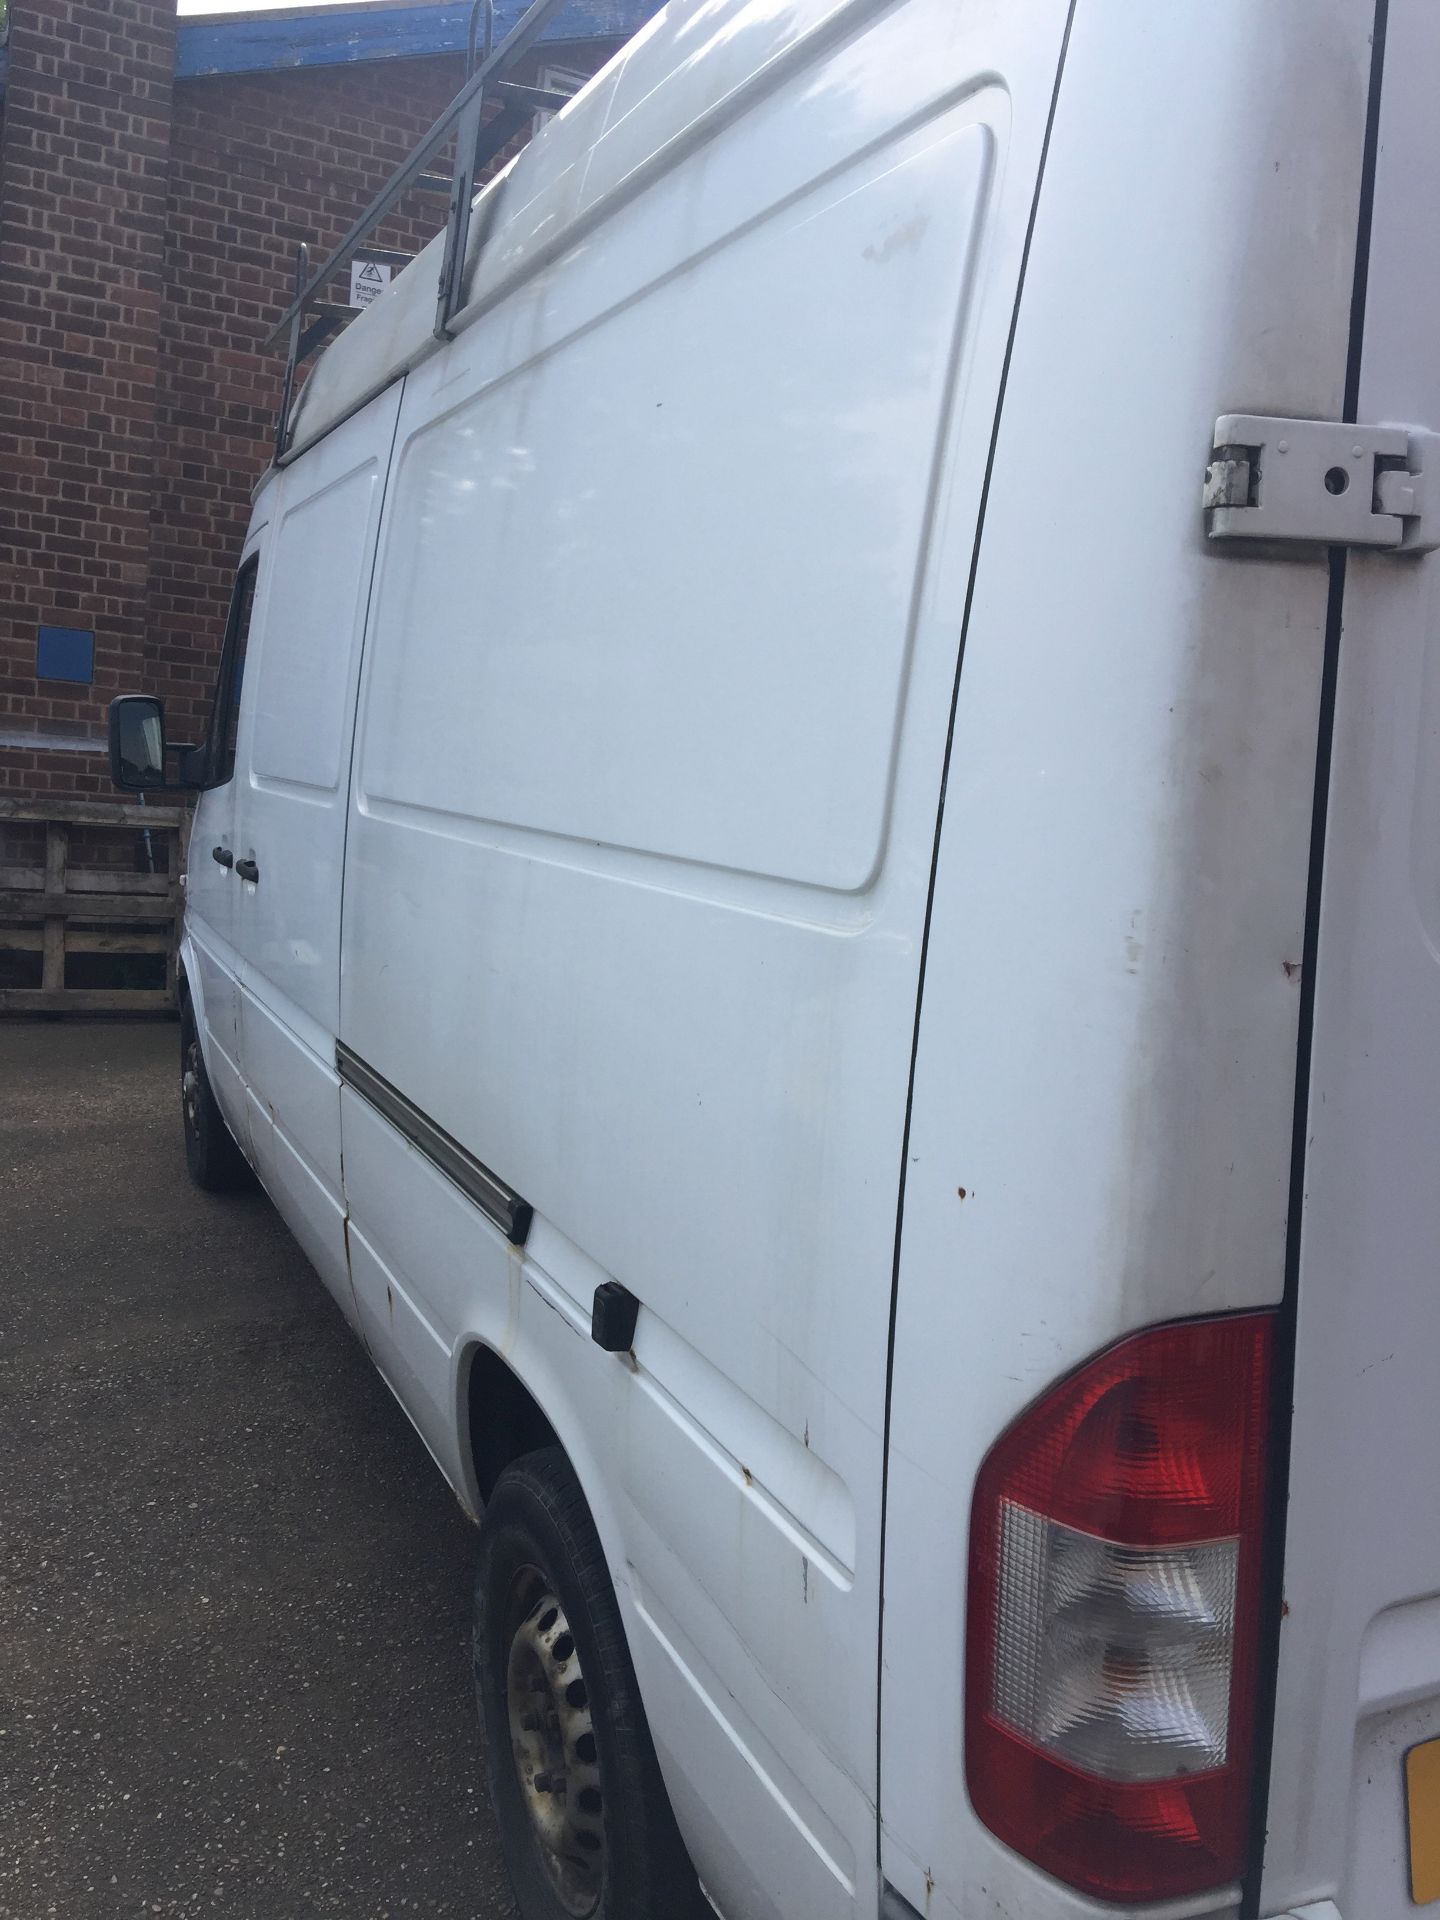 VW Sprinter 132,000 miles recently serviced reg FA03 UEE with roof rack good condition (DERBY) - Image 5 of 10